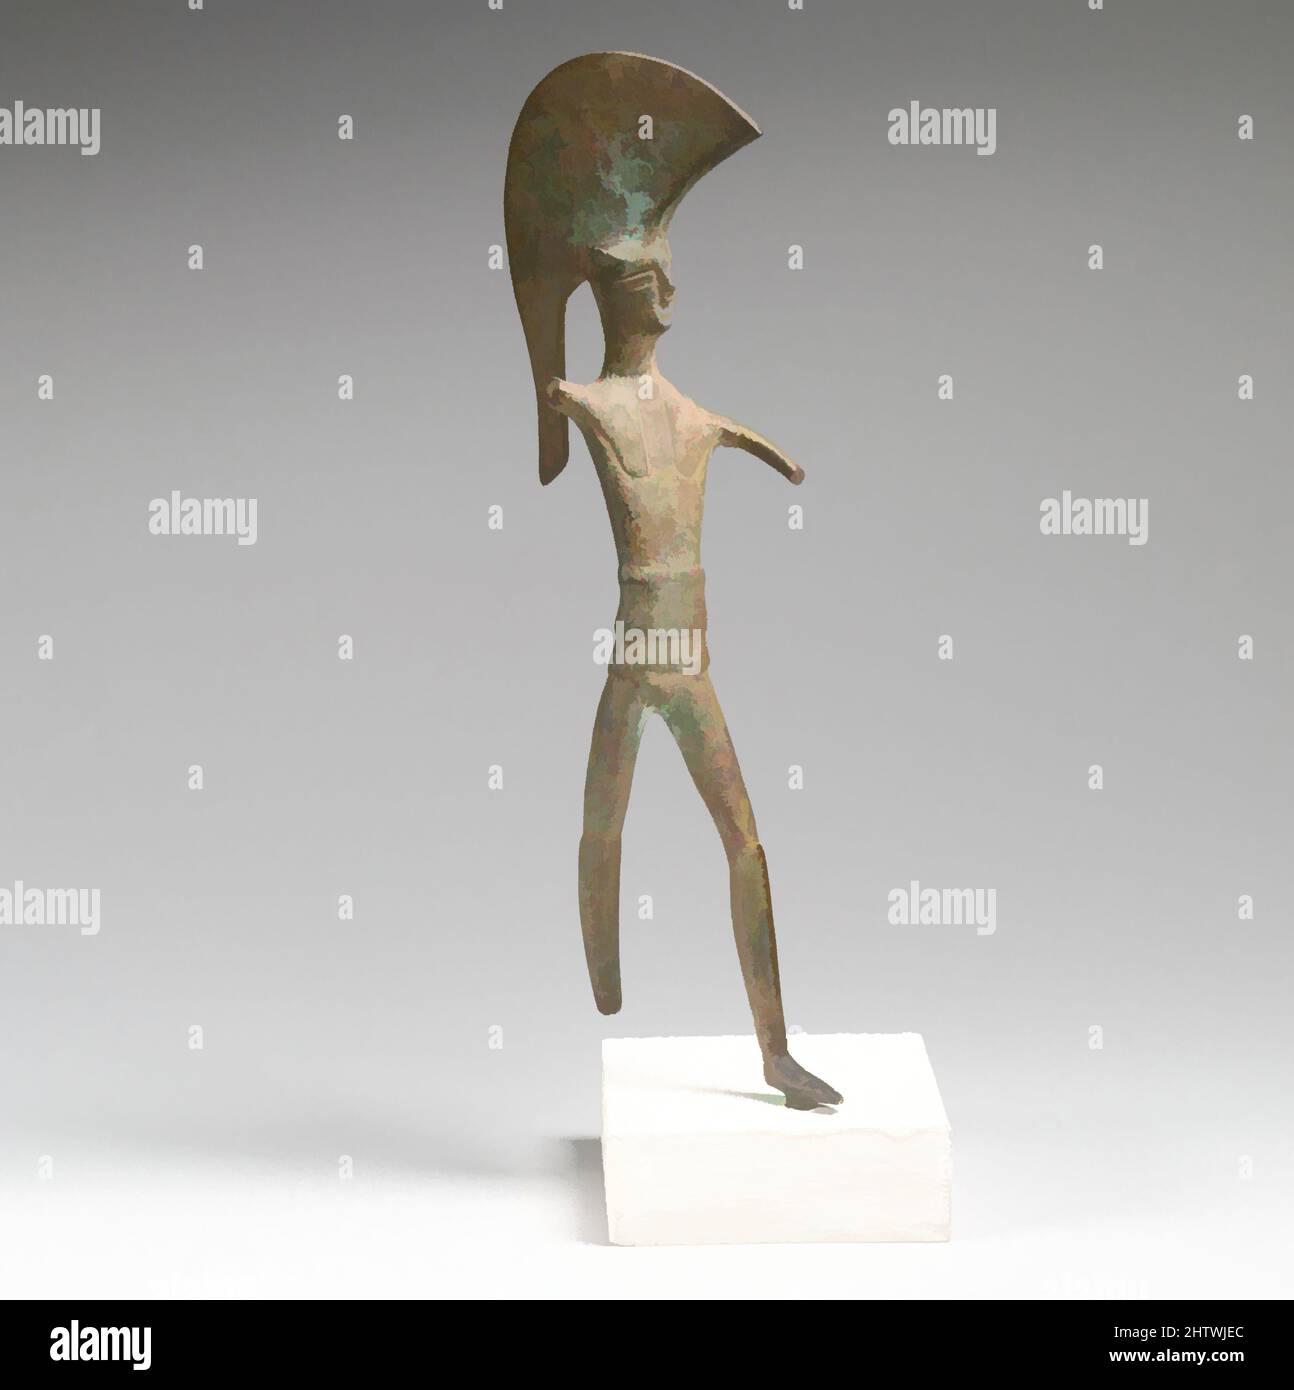 Art inspired by Statuette of Ares ?, Bronze, H.: 8 in. (20.3 cm), Bronzes, Classic works modernized by Artotop with a splash of modernity. Shapes, color and value, eye-catching visual impact on art. Emotions through freedom of artworks in a contemporary way. A timeless message pursuing a wildly creative new direction. Artists turning to the digital medium and creating the Artotop NFT Stock Photo